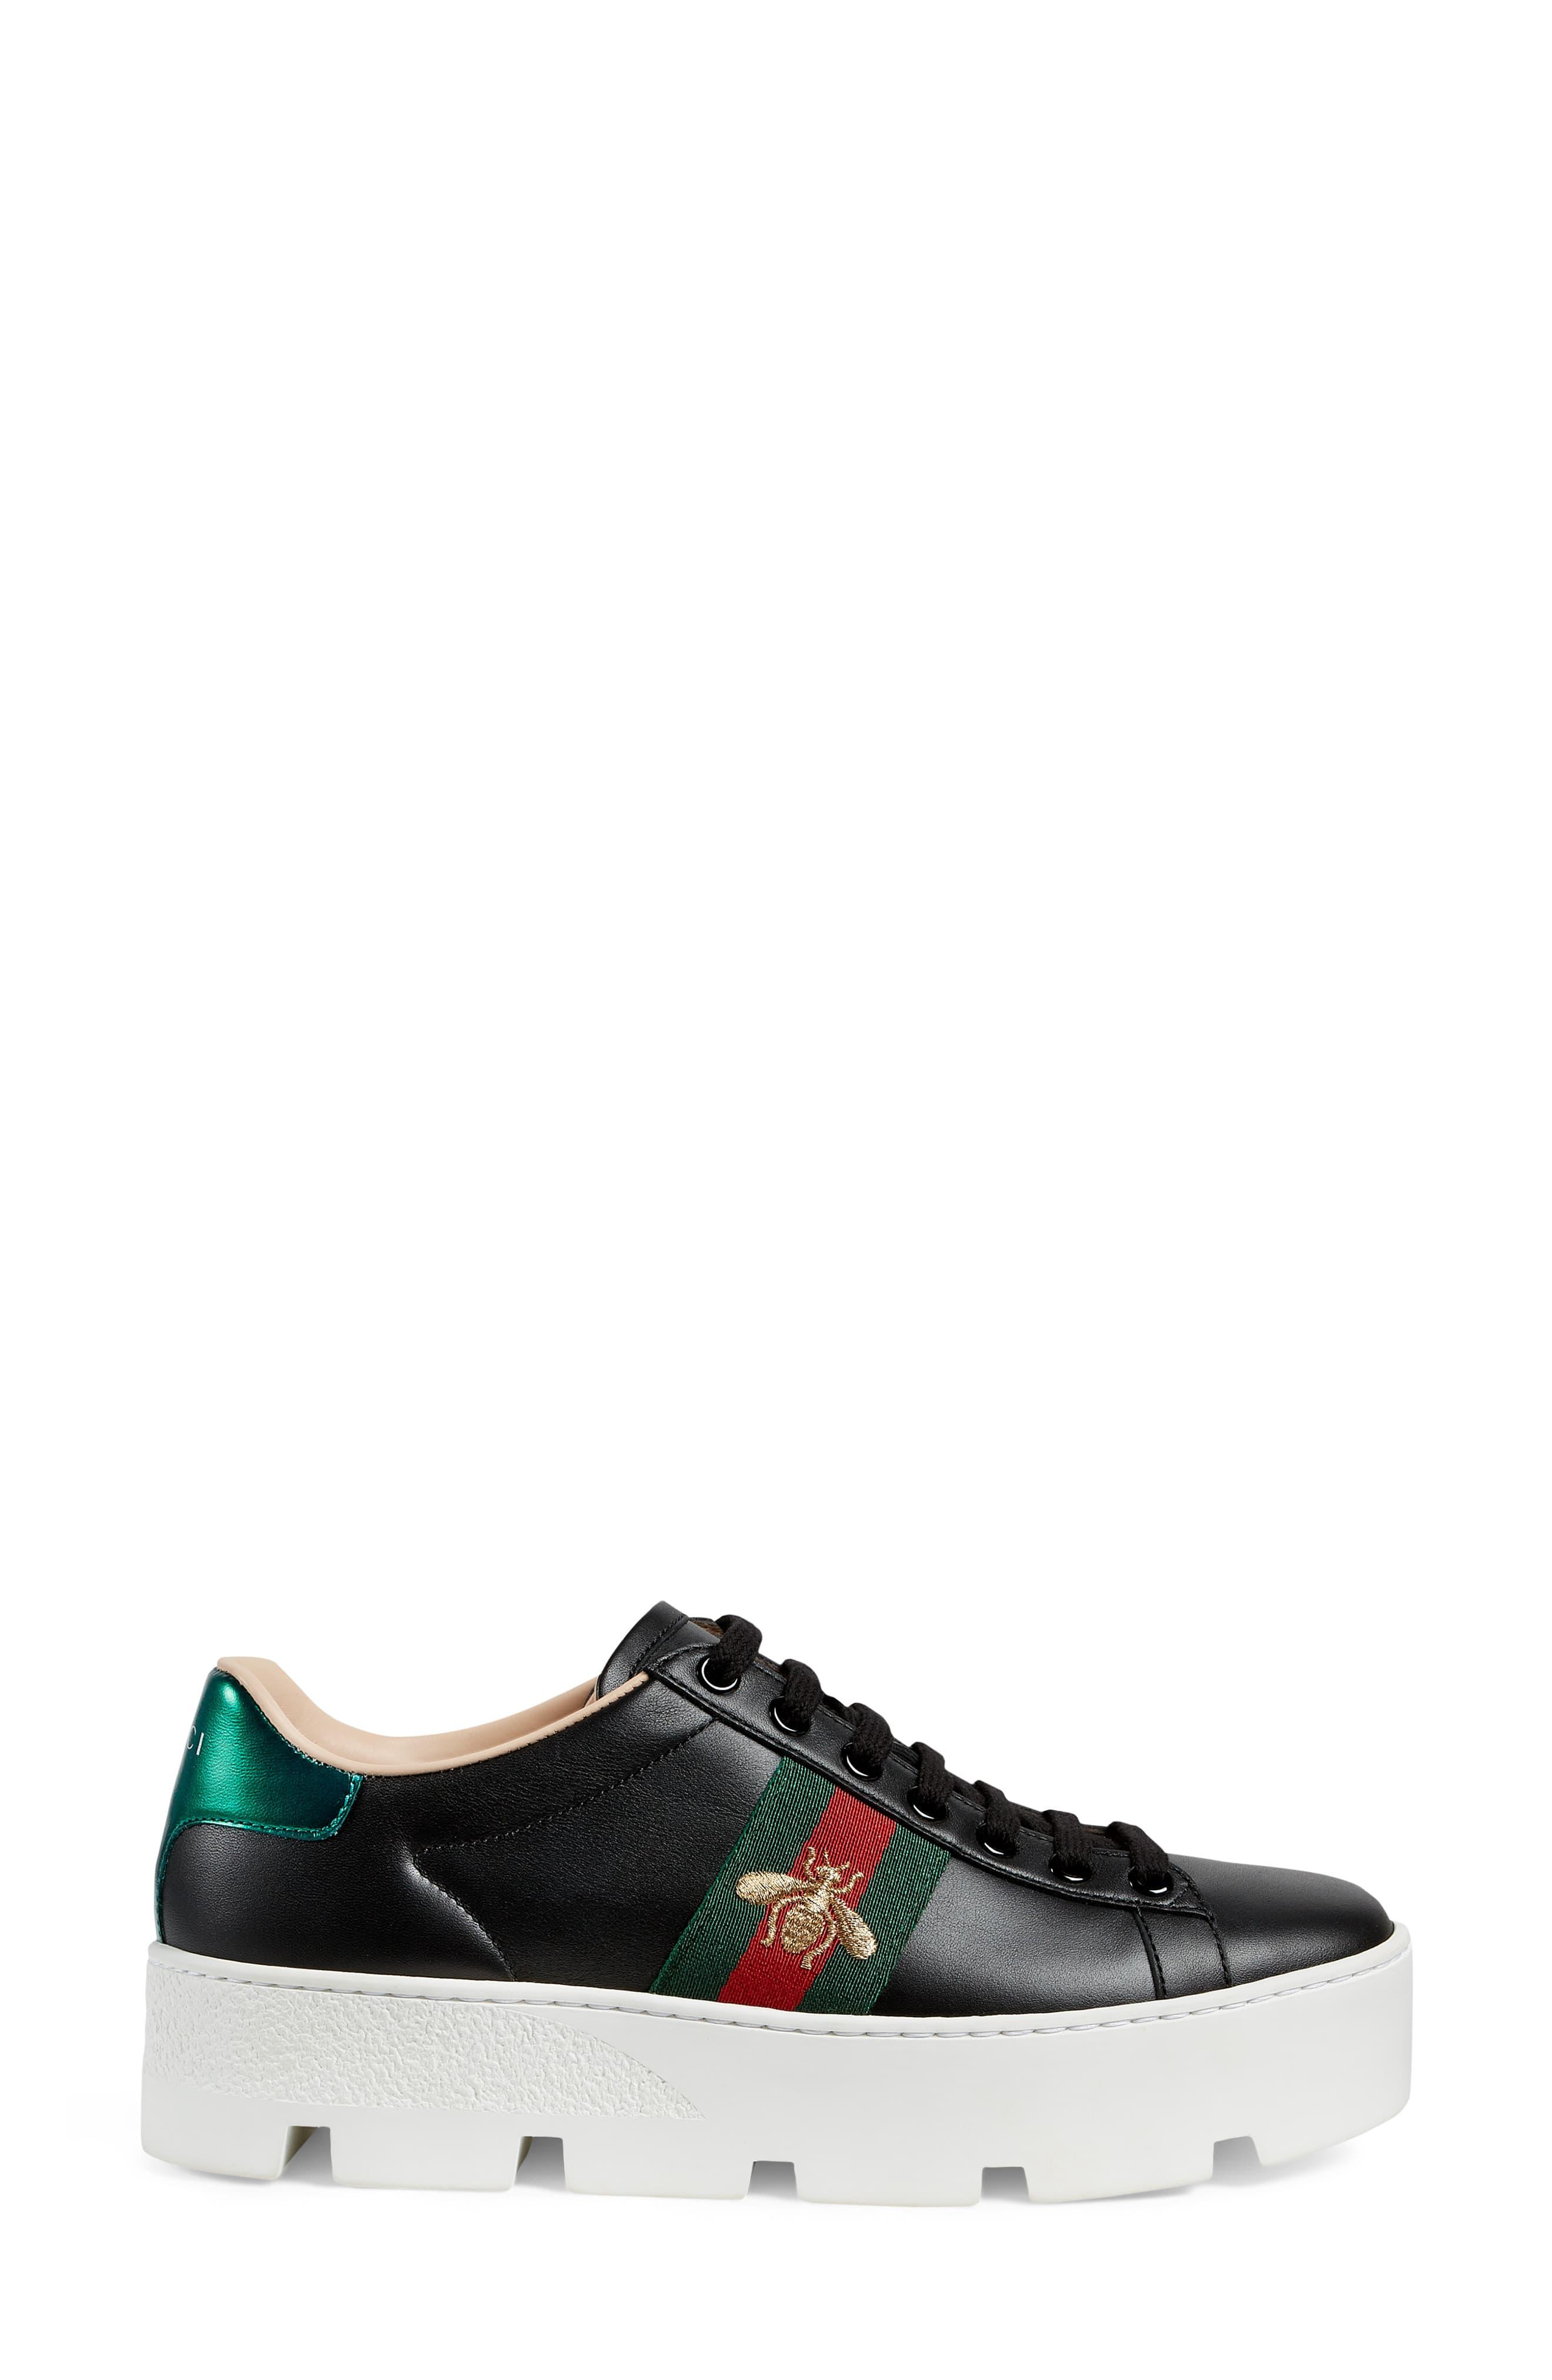 Gucci Ace Leather Platform Sneakers - Lyst